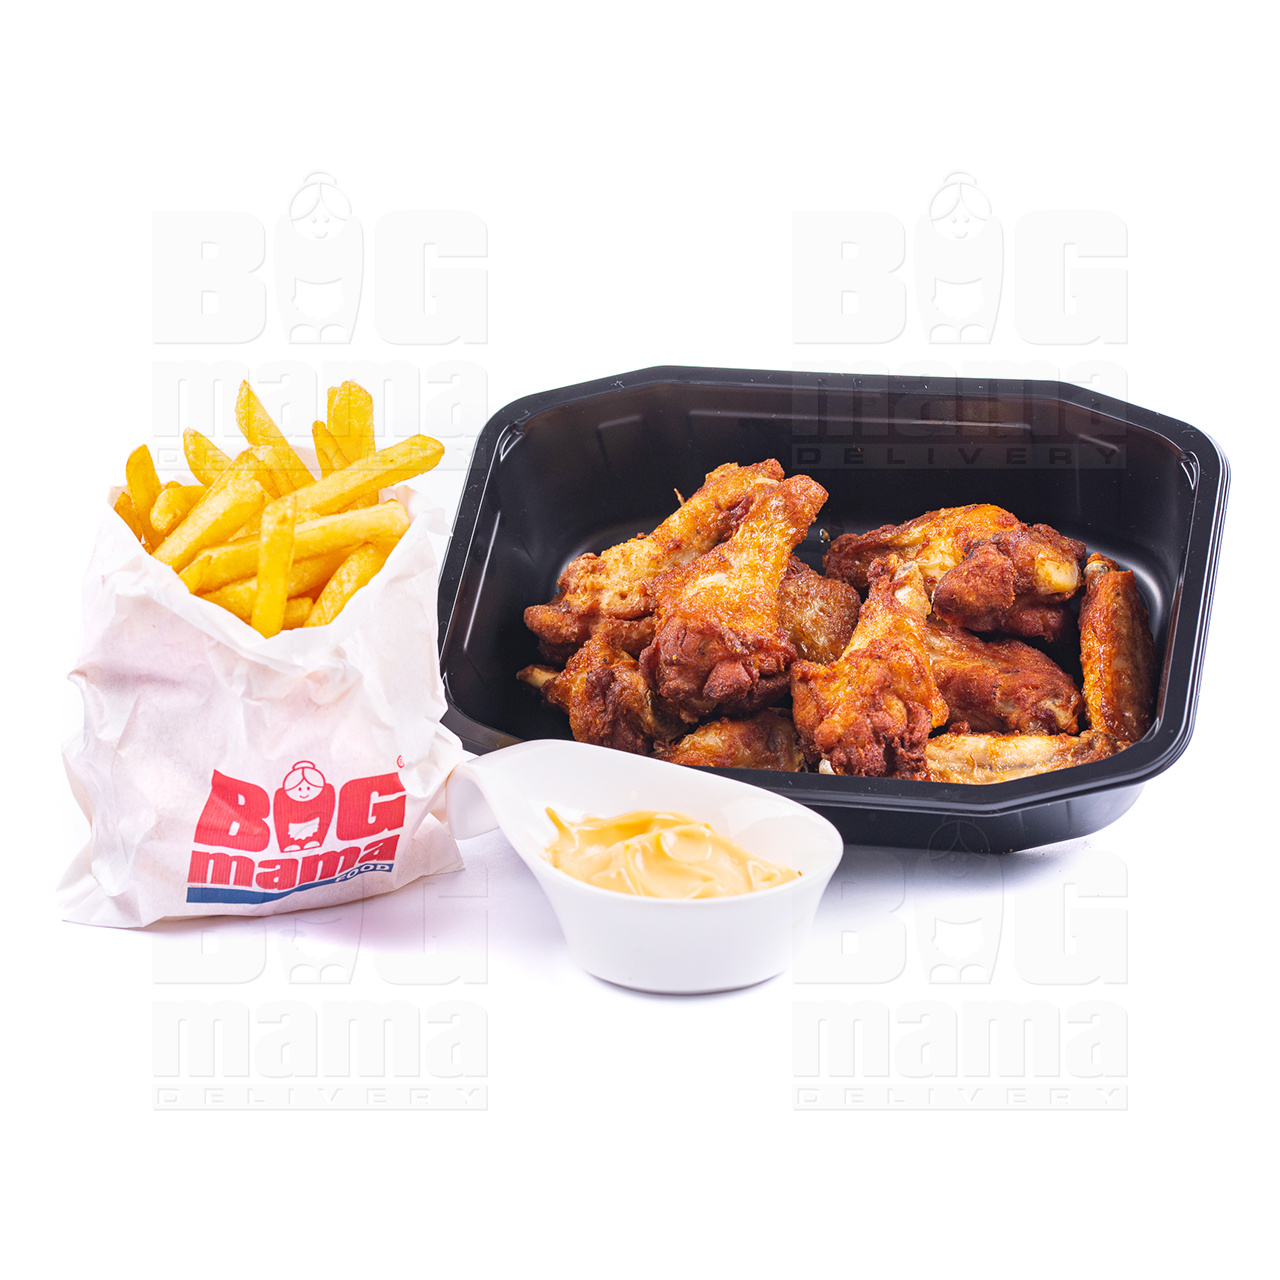 Product #231 image - Spicy wings, french fries, crispy sauce menu